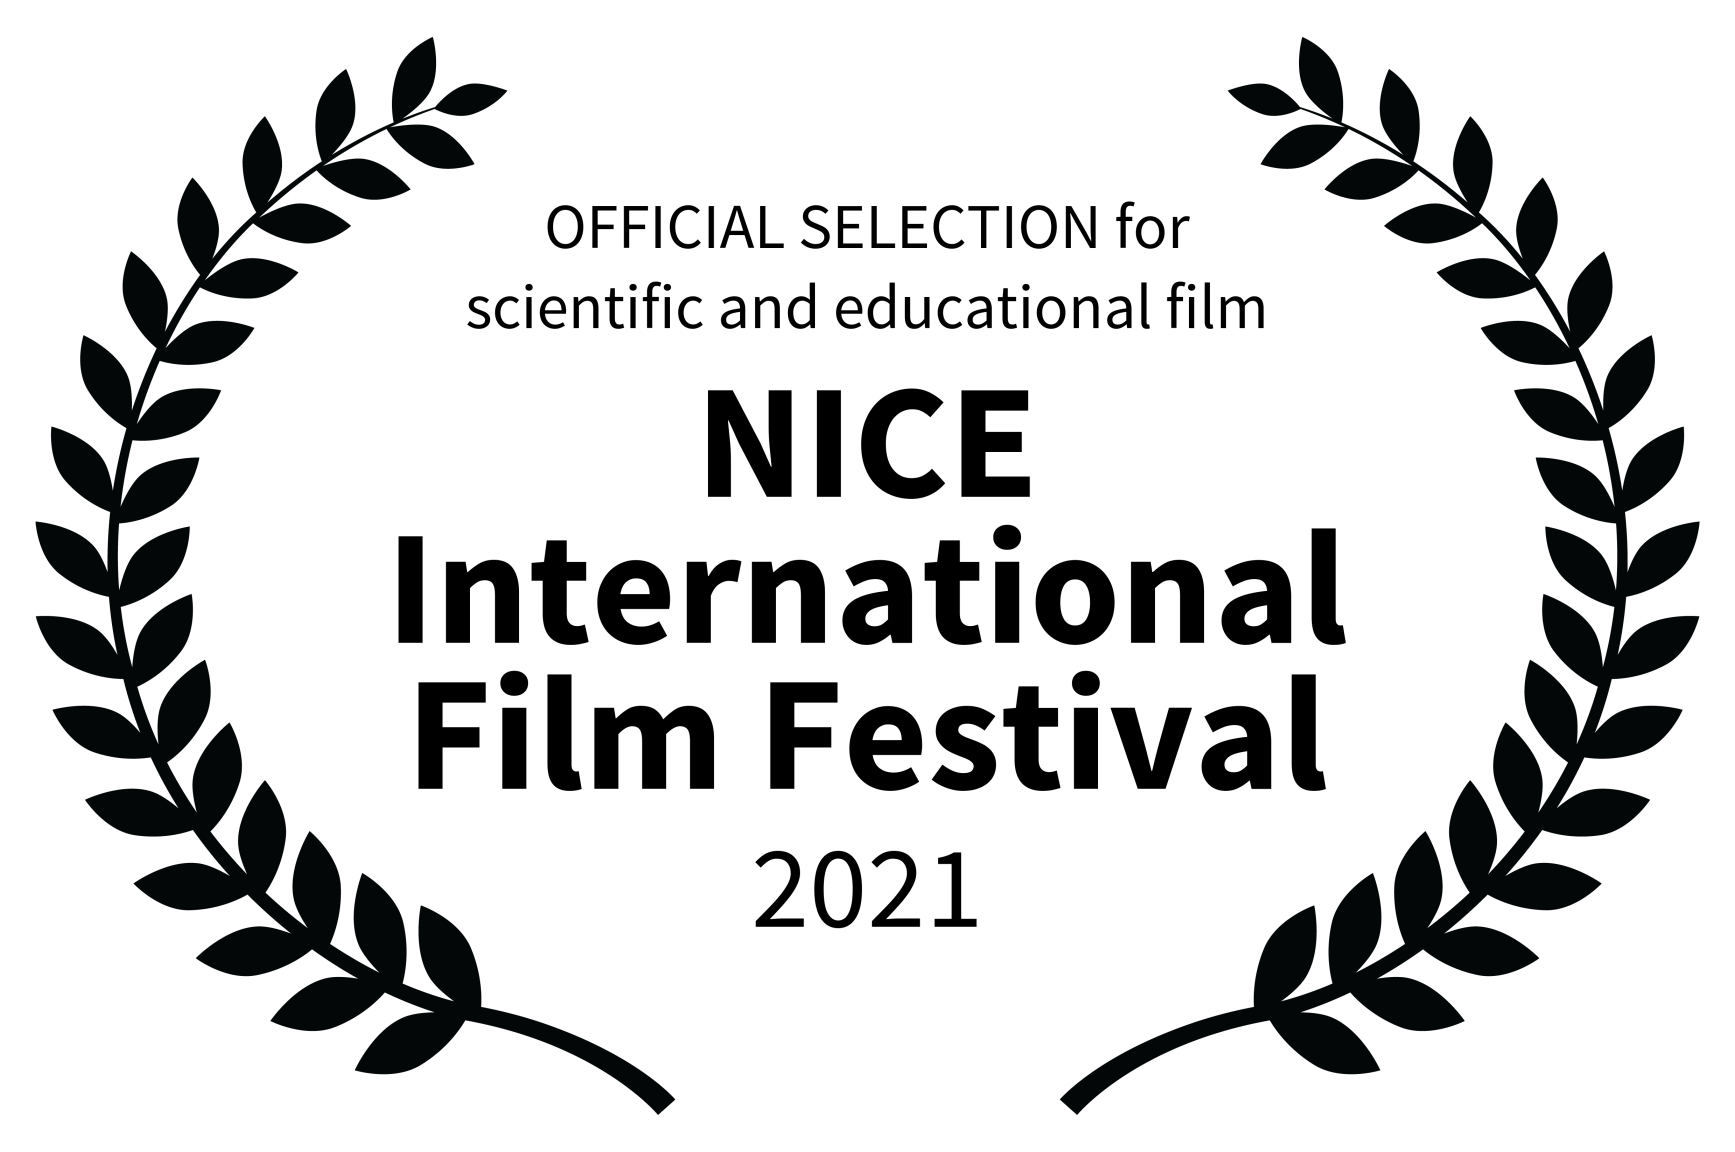 OFFICIAL SELECTION for scientific and educational film NICE International Film Festival 2021 1